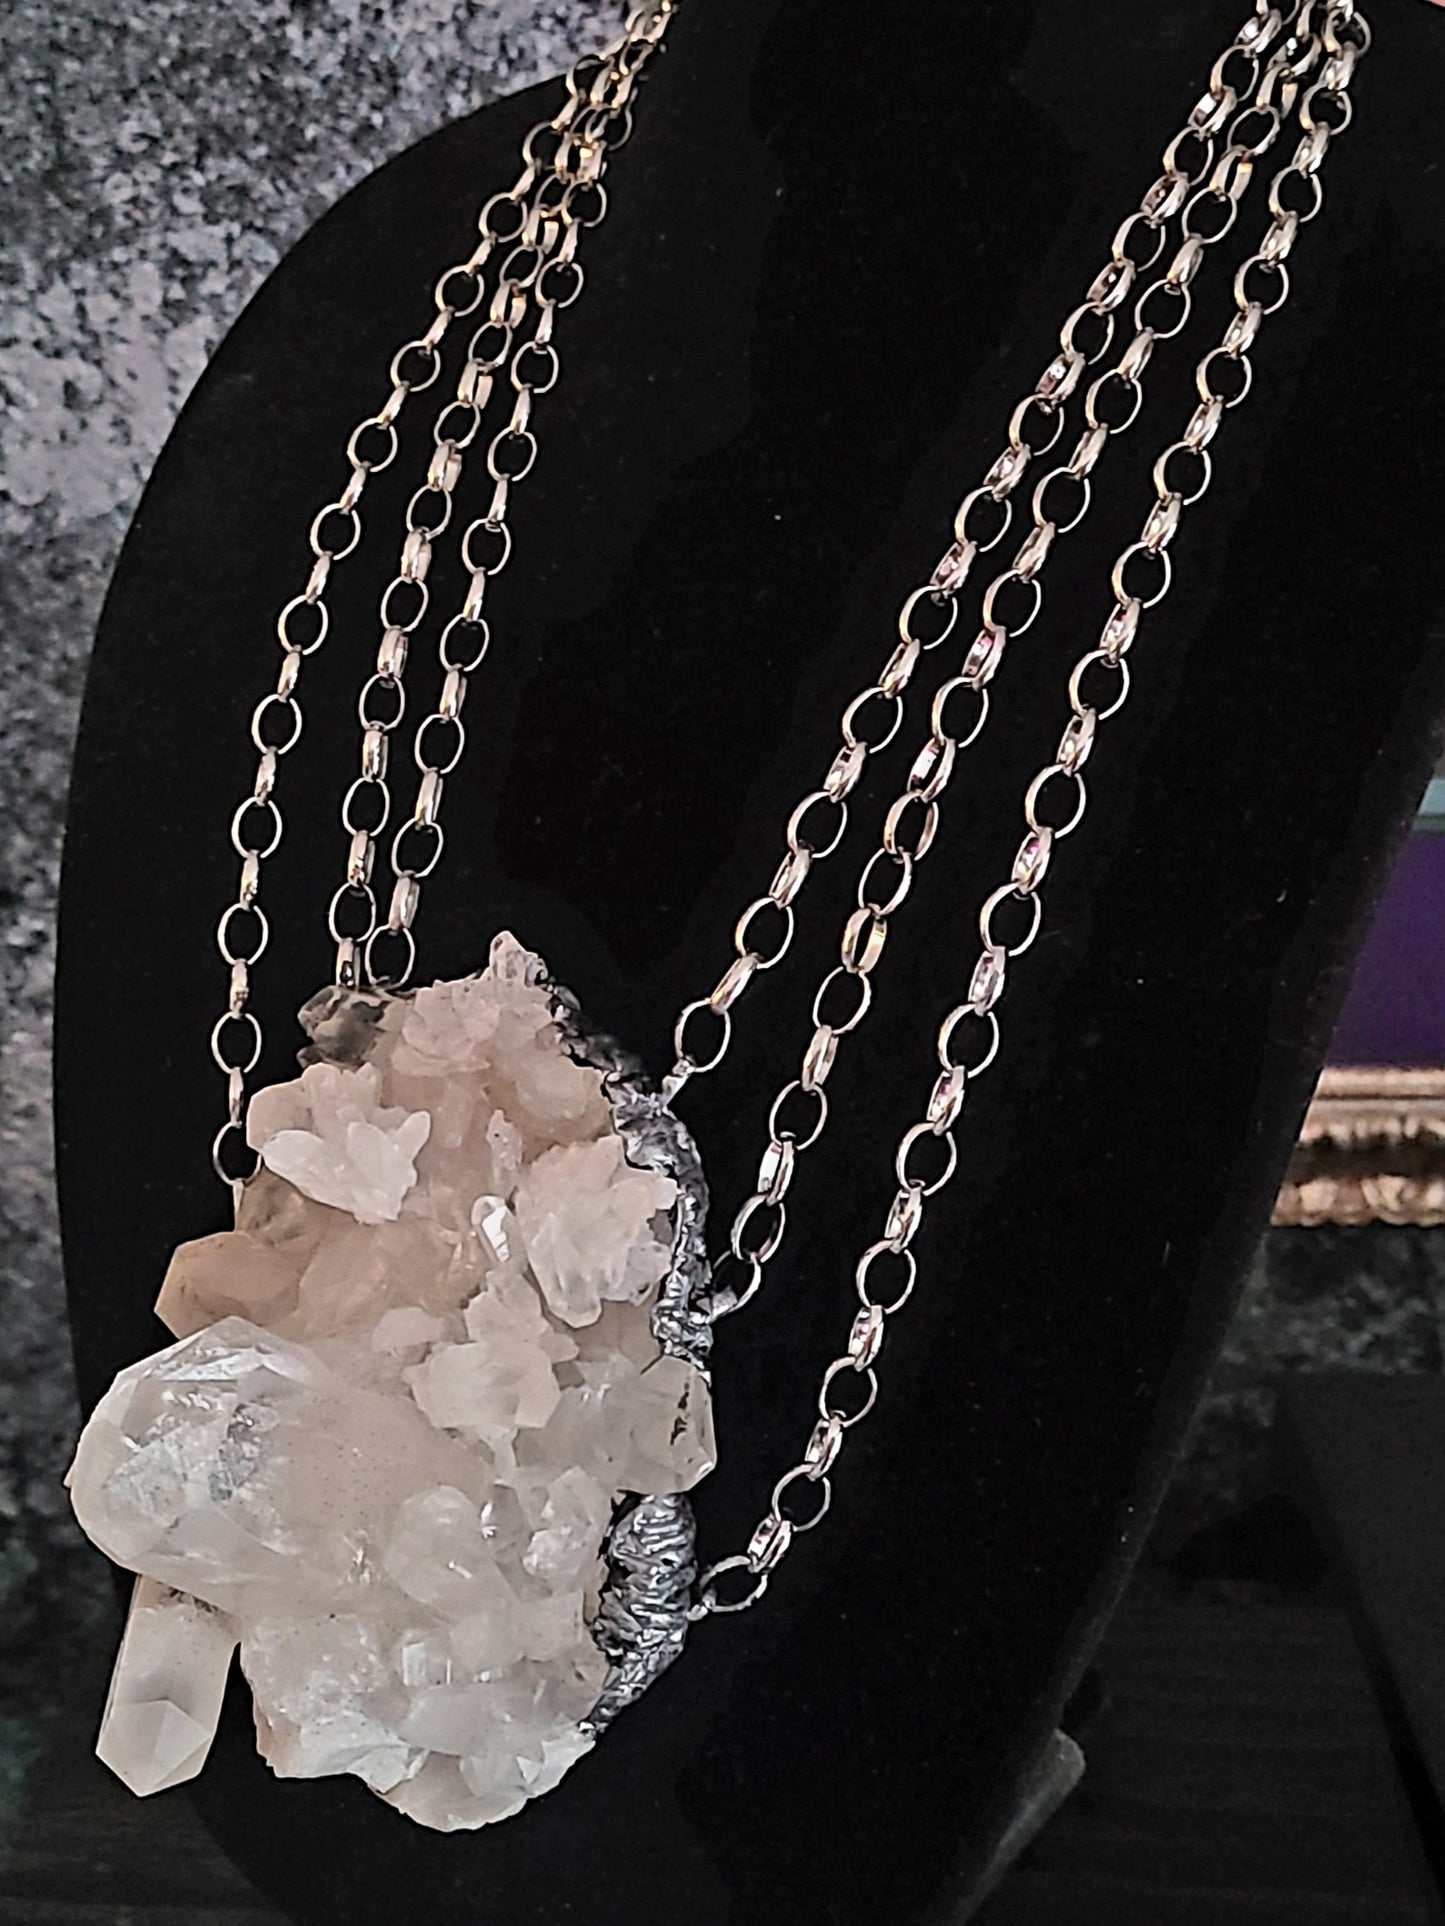 Raw Rough Quartz Cluster Chest Piece With Multiple Chains, Sculpted Avant Garde Statement Bib Necklace, Haute Couture Icy Pagan Amulet, Runway Ready Accessory, KatKouture